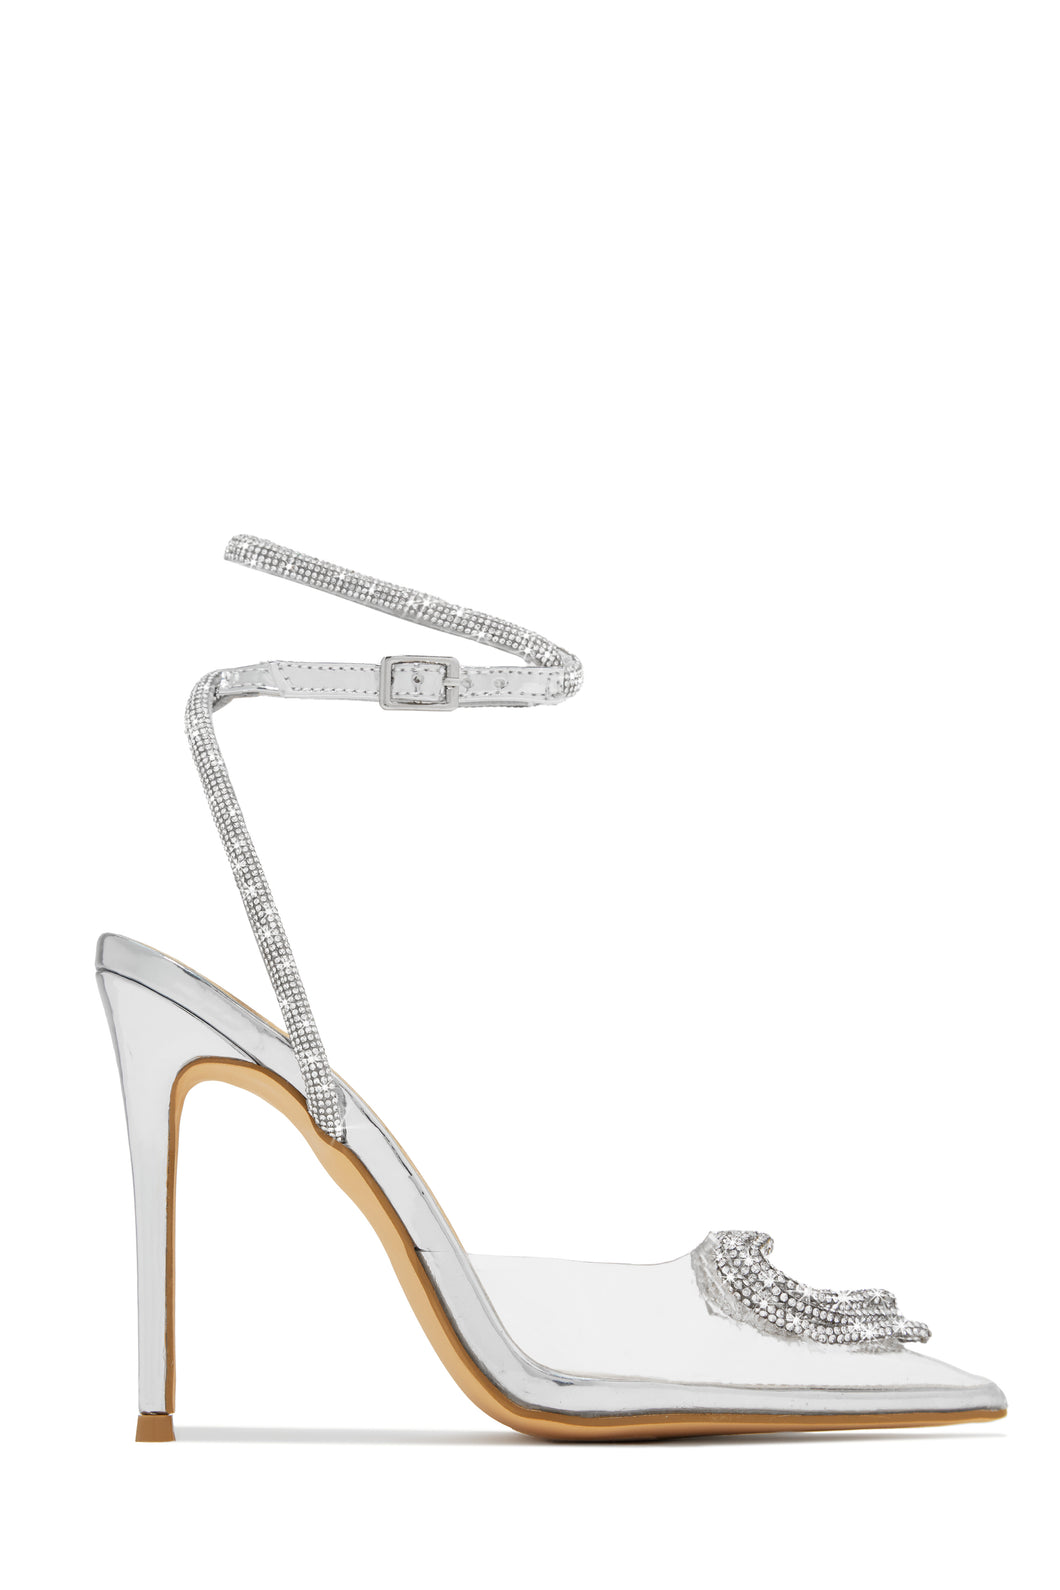 All For Love Heart Embellished High Heels - Silver